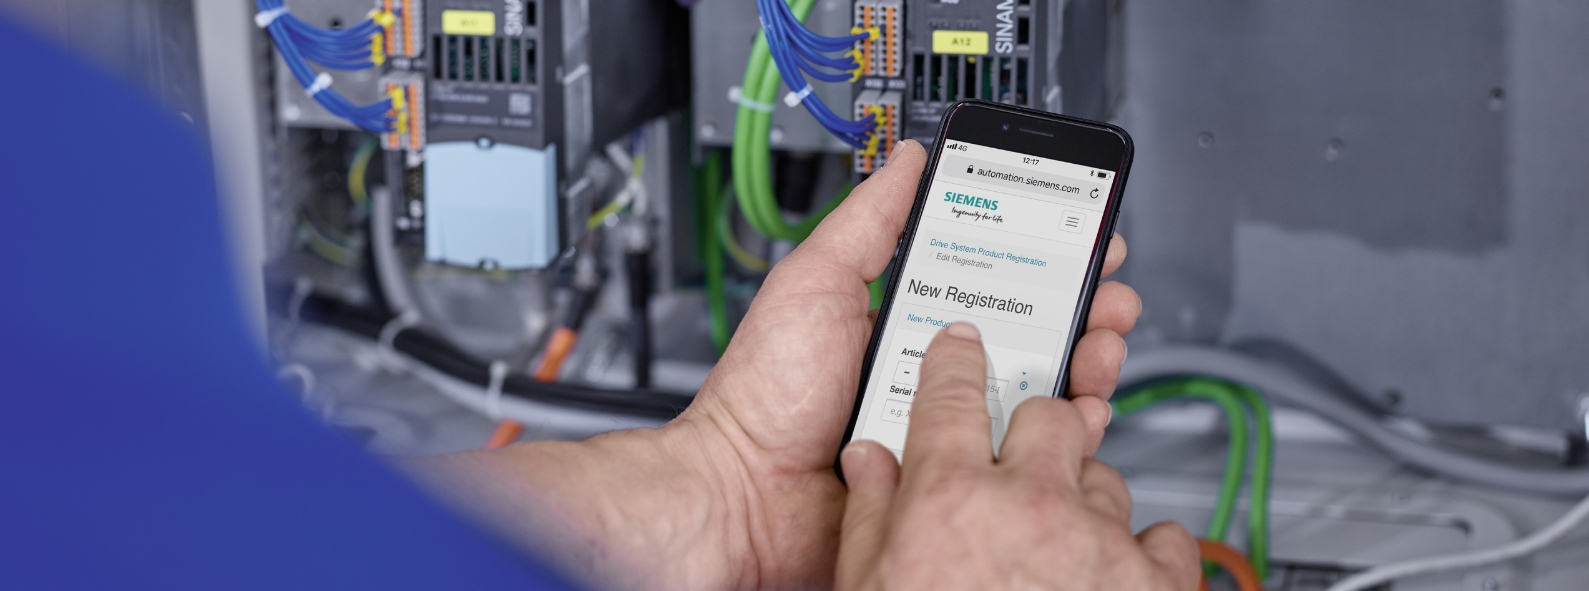 Maintenance, repair and technical support for Siemens equipment and machinery - Grupo Elektra